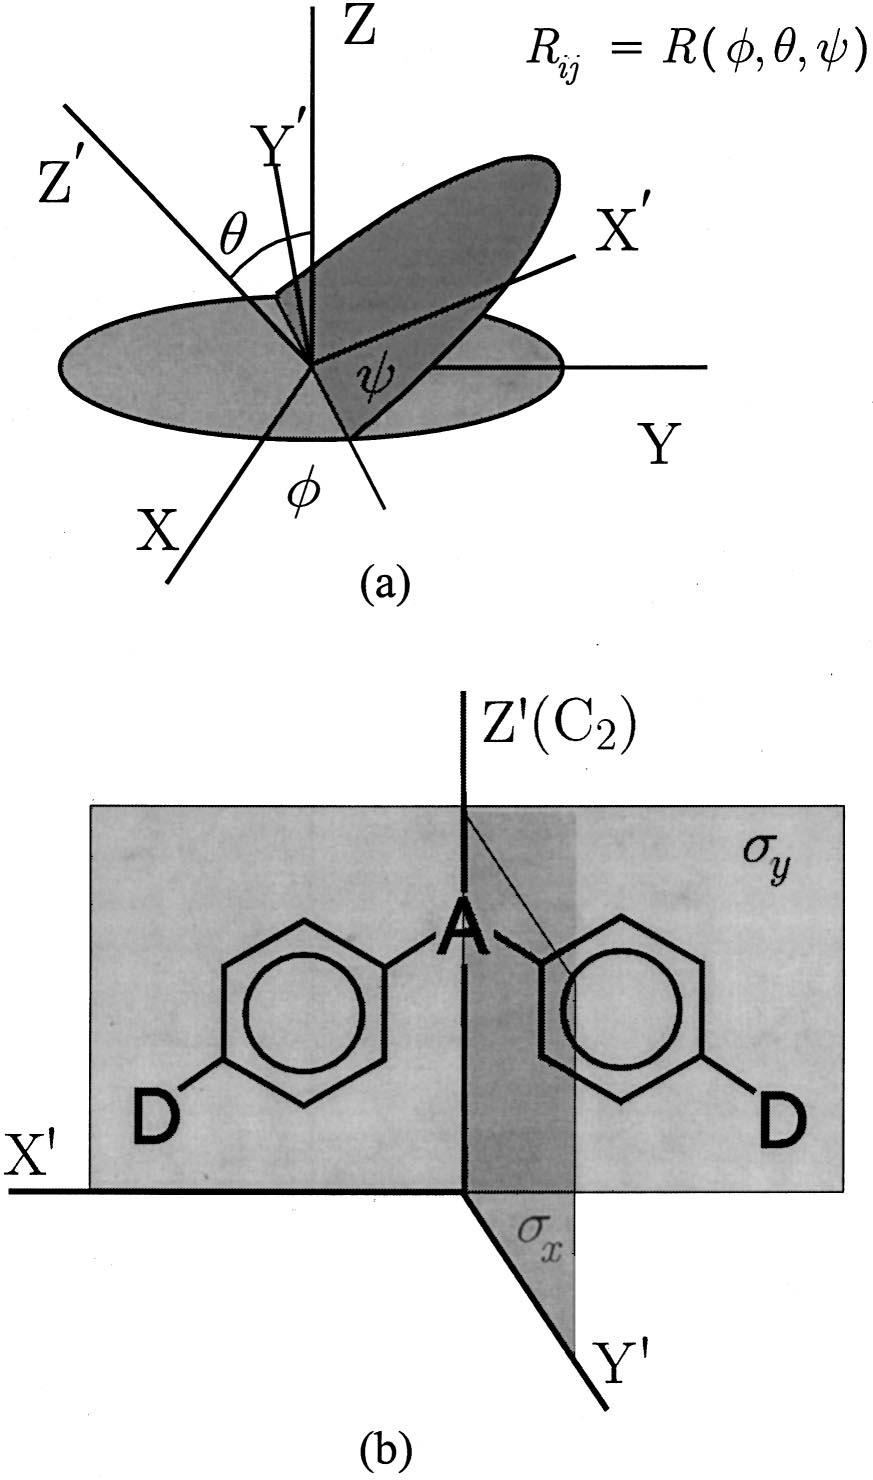 Ostroverkhov et al. Vol. 18, No. 12/ December 2001/ J. Opt. Soc. Am. B 1861 are zzz, zxx, and xzx xxz (assuming z, the twofold axis and zx, the plane of the molecule).